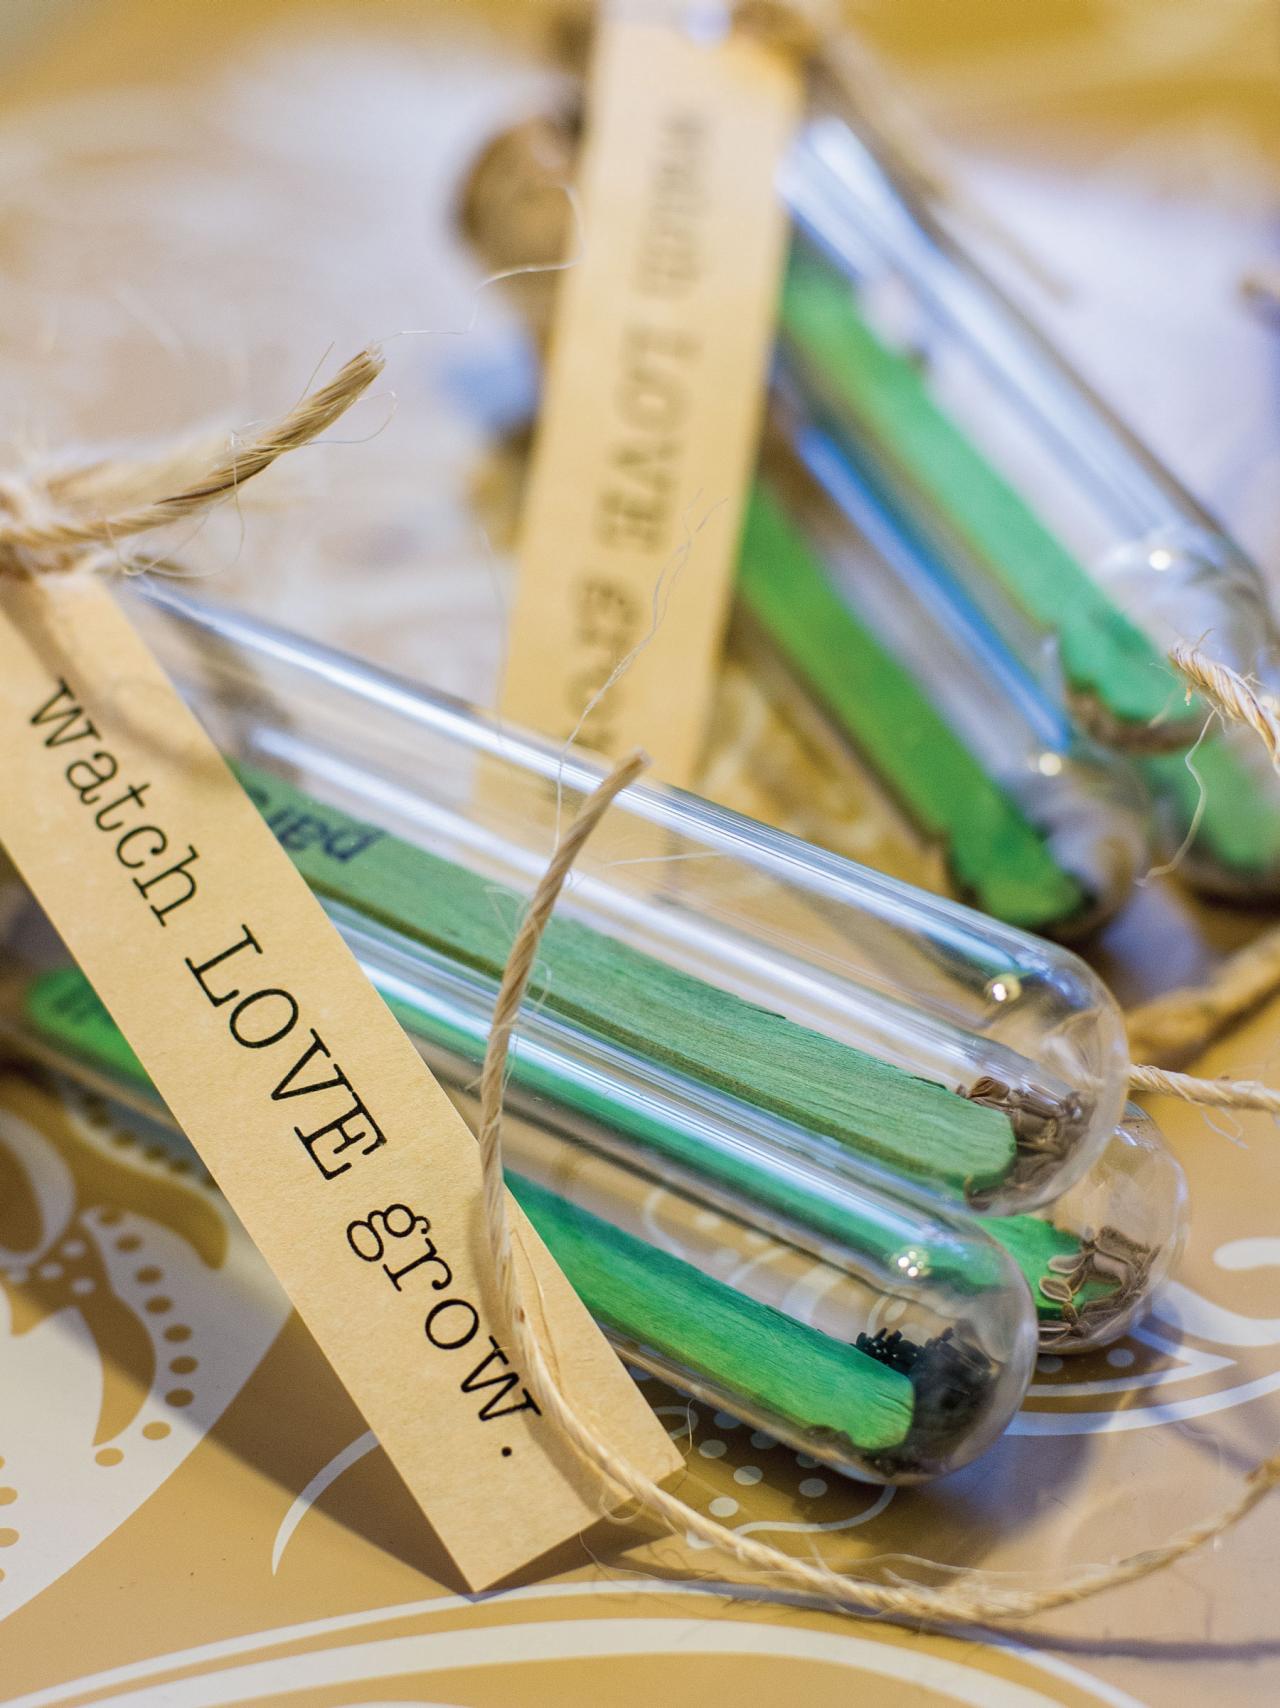 HGTV.com has ideas for easy-to-make gifts your wedding guests will actually want to take home.